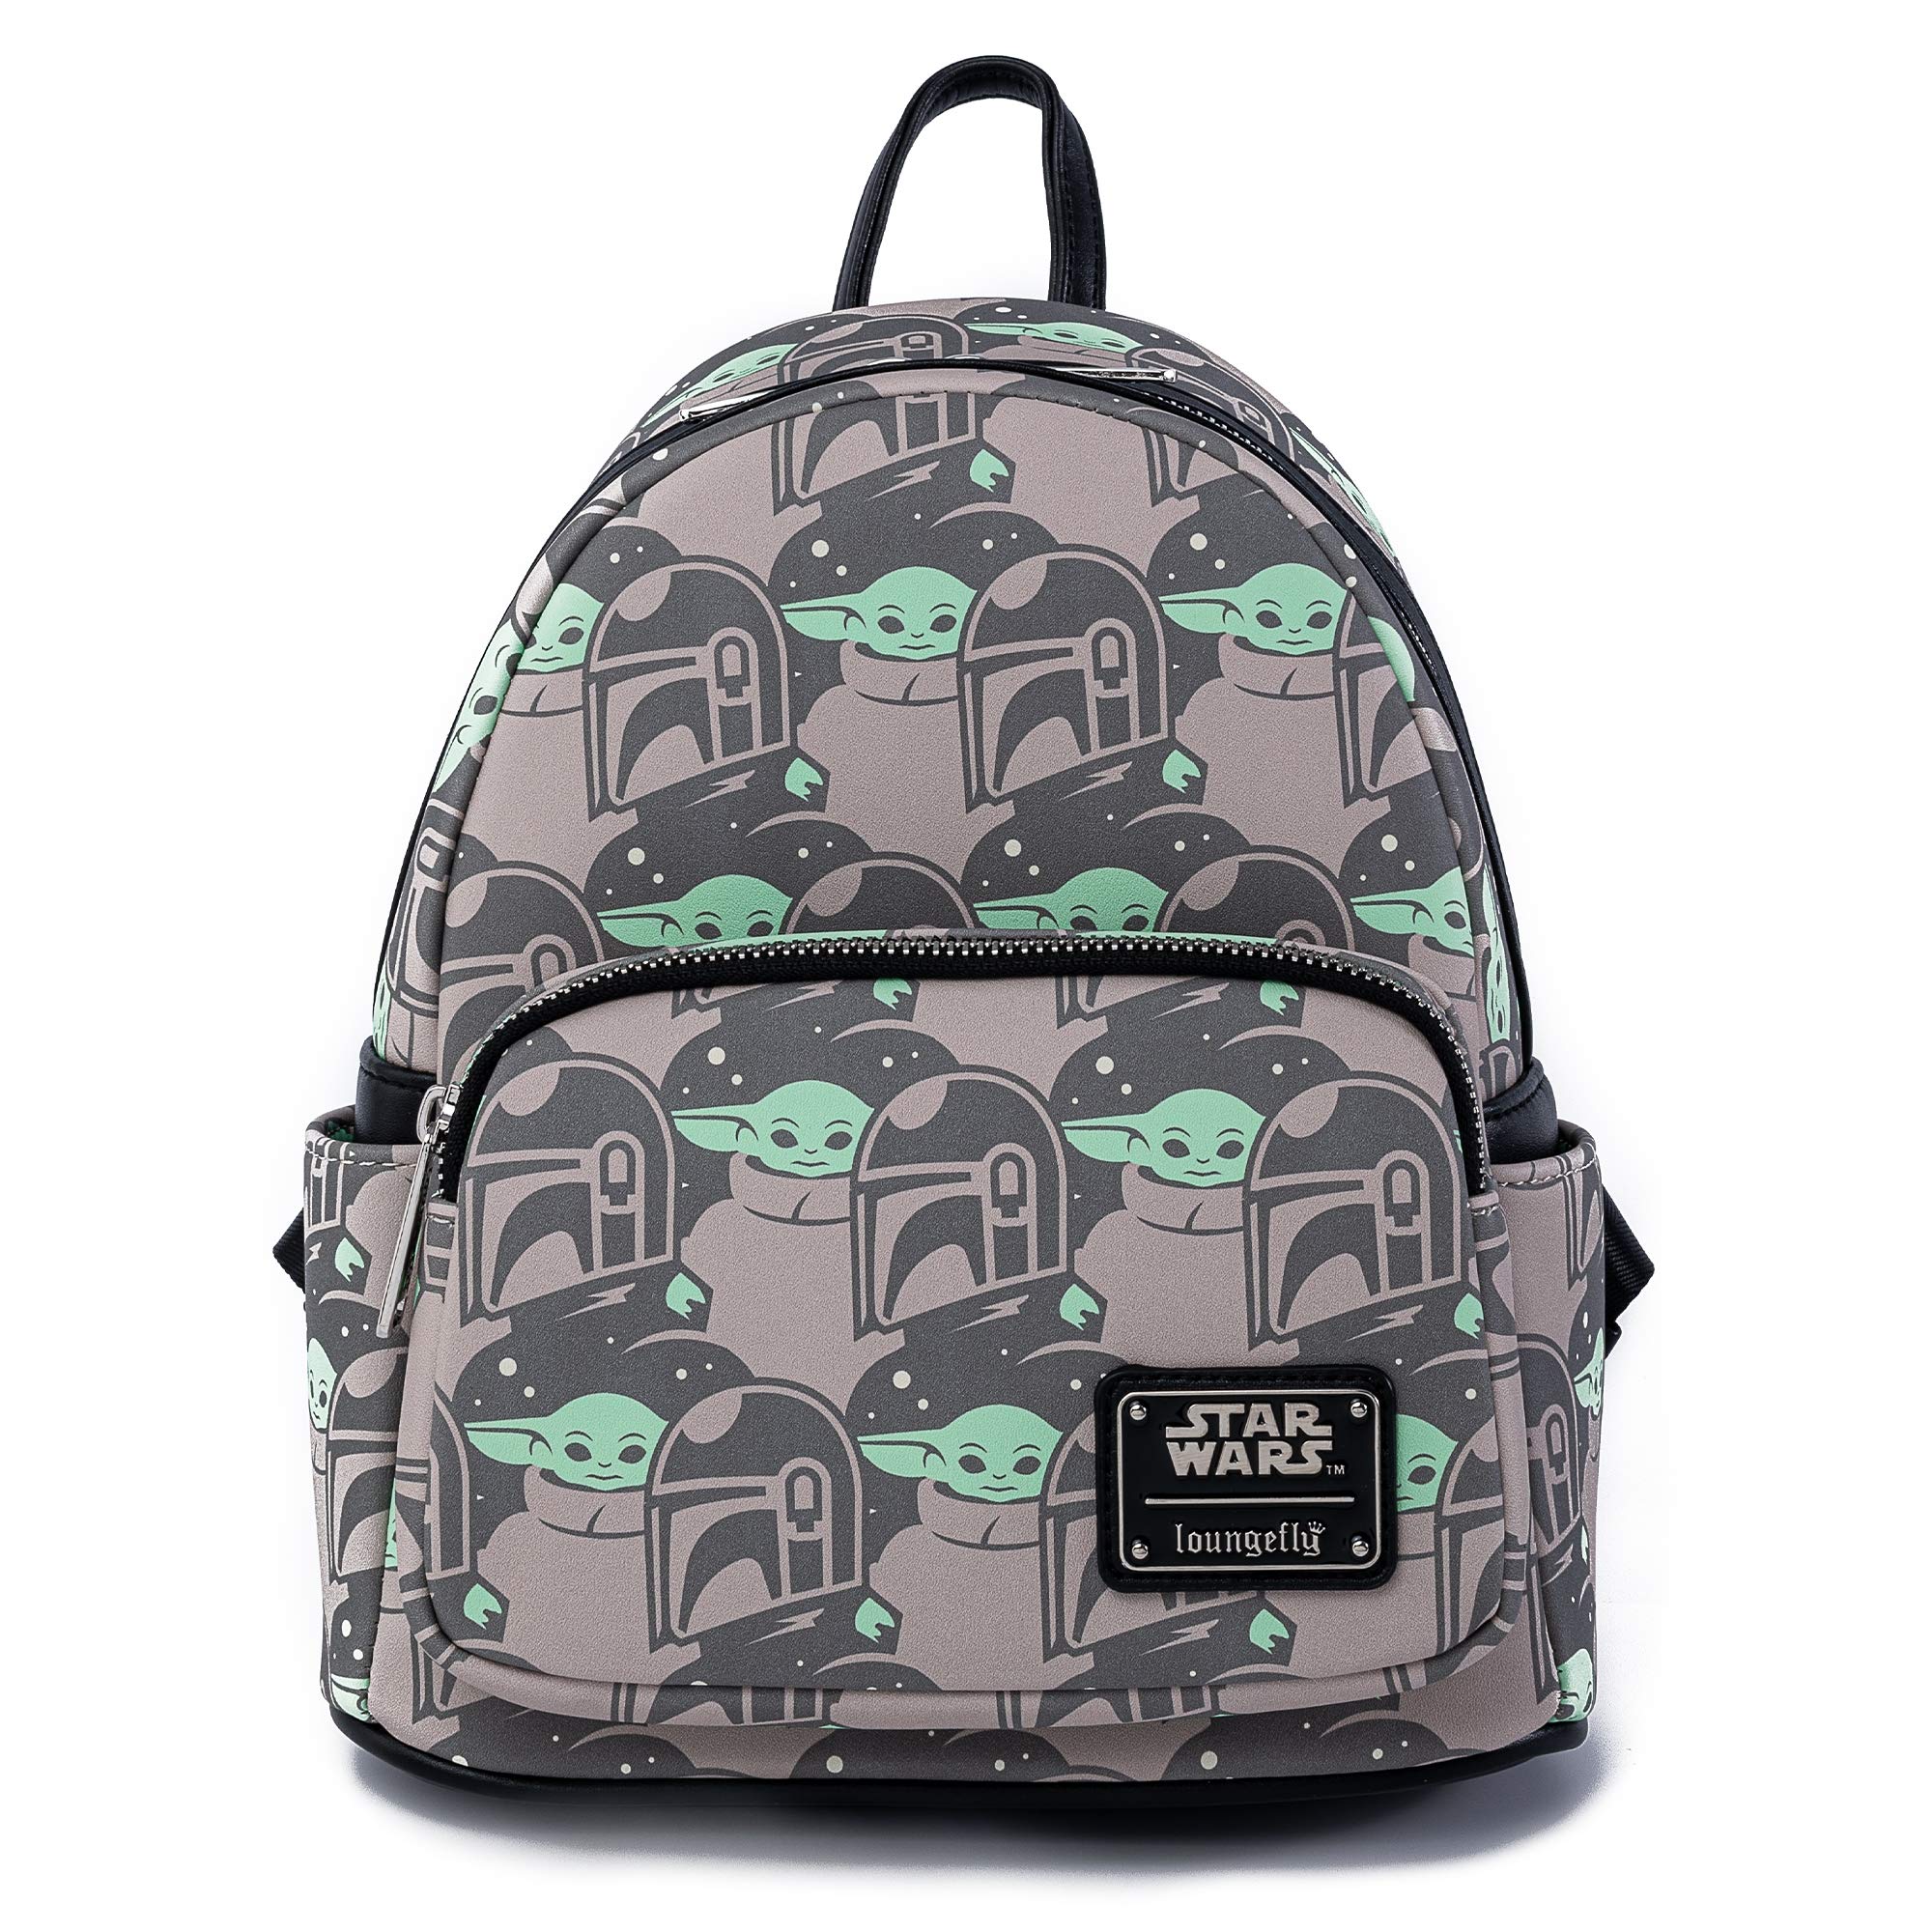 Funko Loungefly: Star Wars - The Mandolorian - The Child and Mandolorian Mini Backpack - All over print